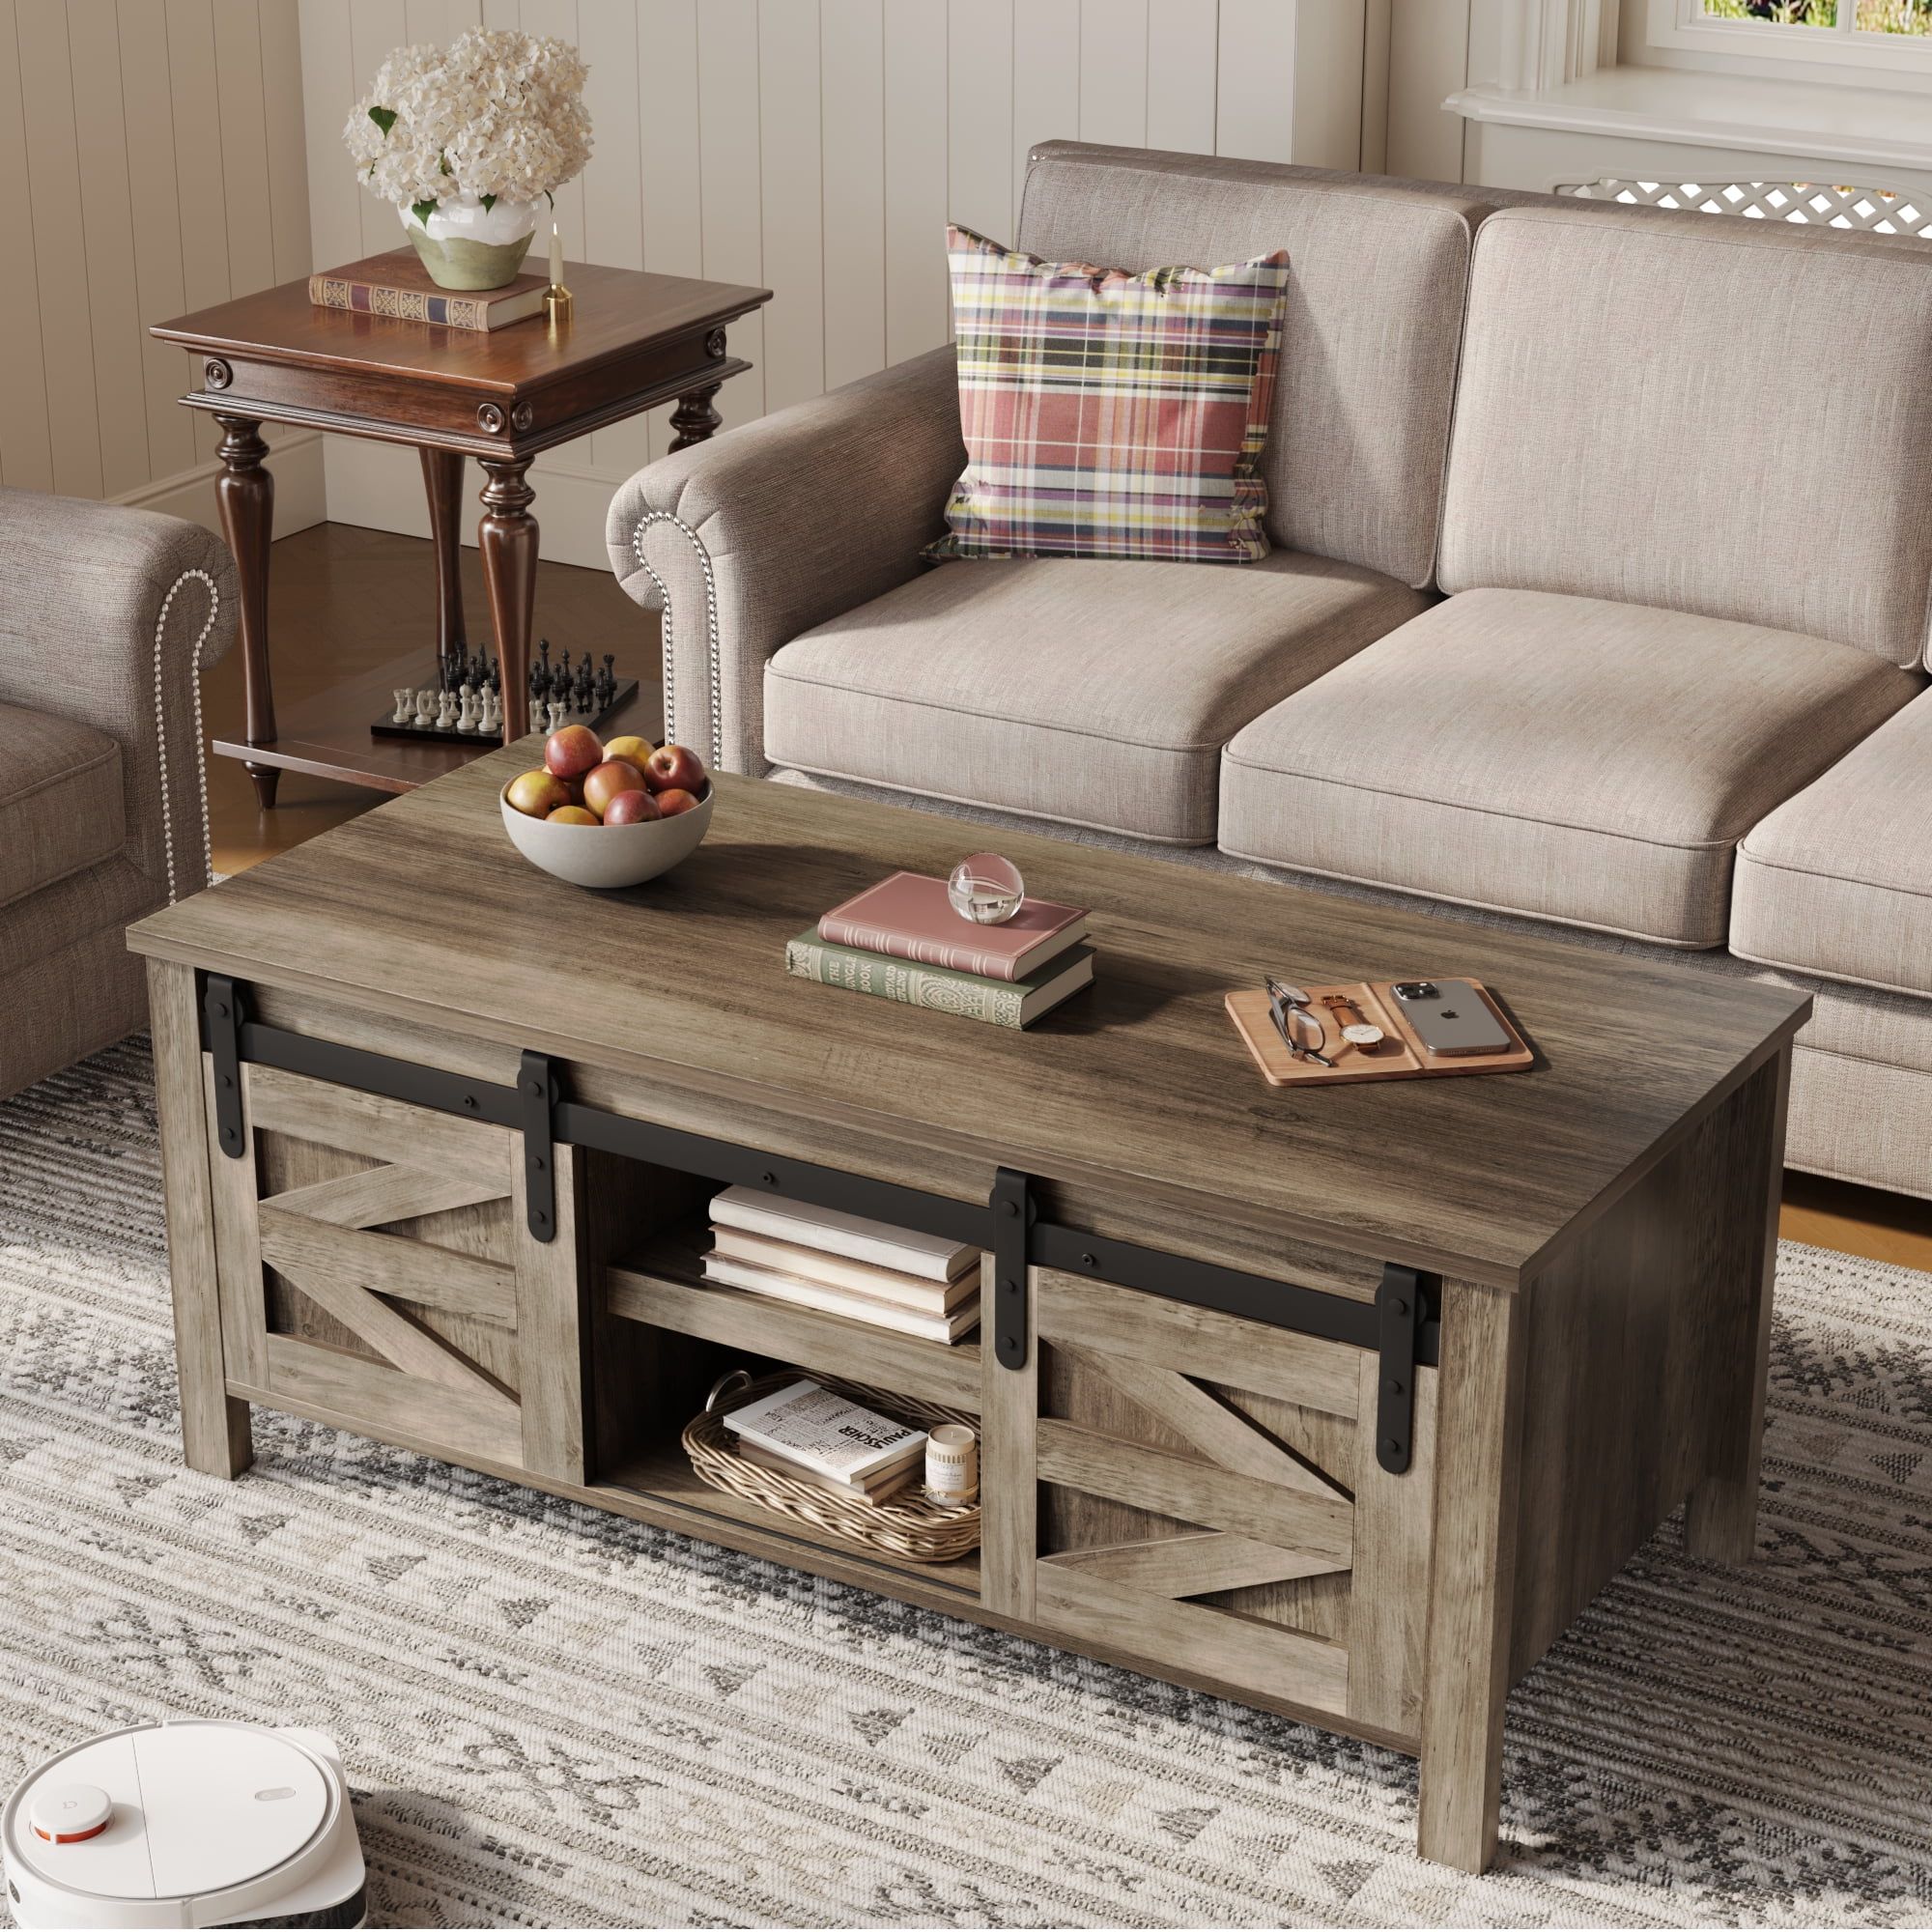 Homall Farmhouse Coffee Table Rustic Wooden Center Rectangular Table With Sliding  Barn Doors, Adjustable Cabinet Shelves For Bedroom, Home Office, Living  Room, Gray – Walmart With Coffee Tables With Sliding Barn Doors (View 9 of 15)